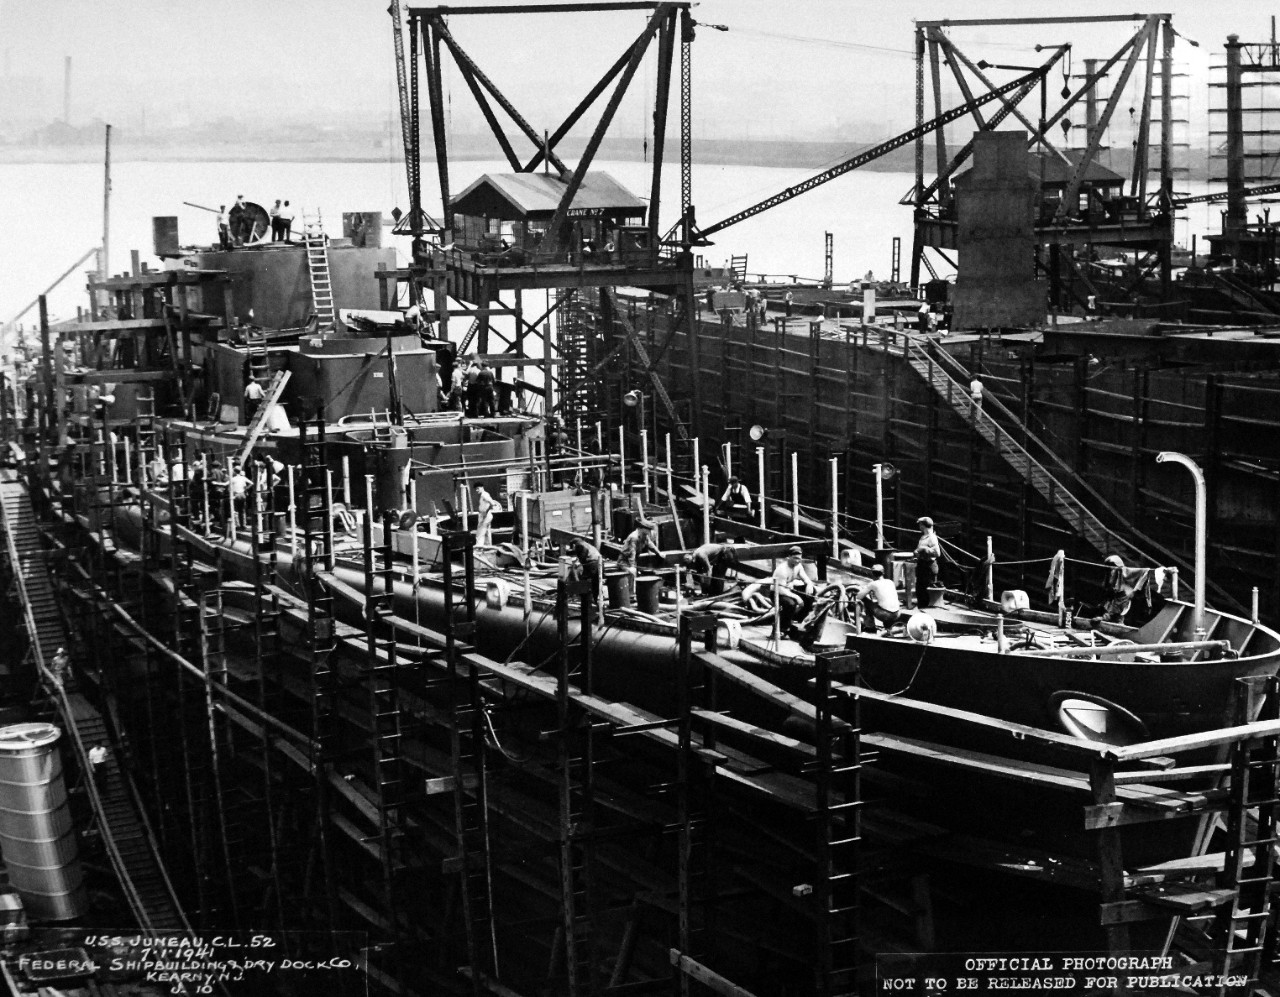 19-LC-28139:  USS Juneau (CL-52),  July 1941.     Light cruiser is shown under construction at Federal Shipbuilding and Drydock Company, Kearny, New Jersey, July 1, 1941.  U.S. Bureau of Ships Photograph, now in the collections of the National Archives.  (2015/02/18). 